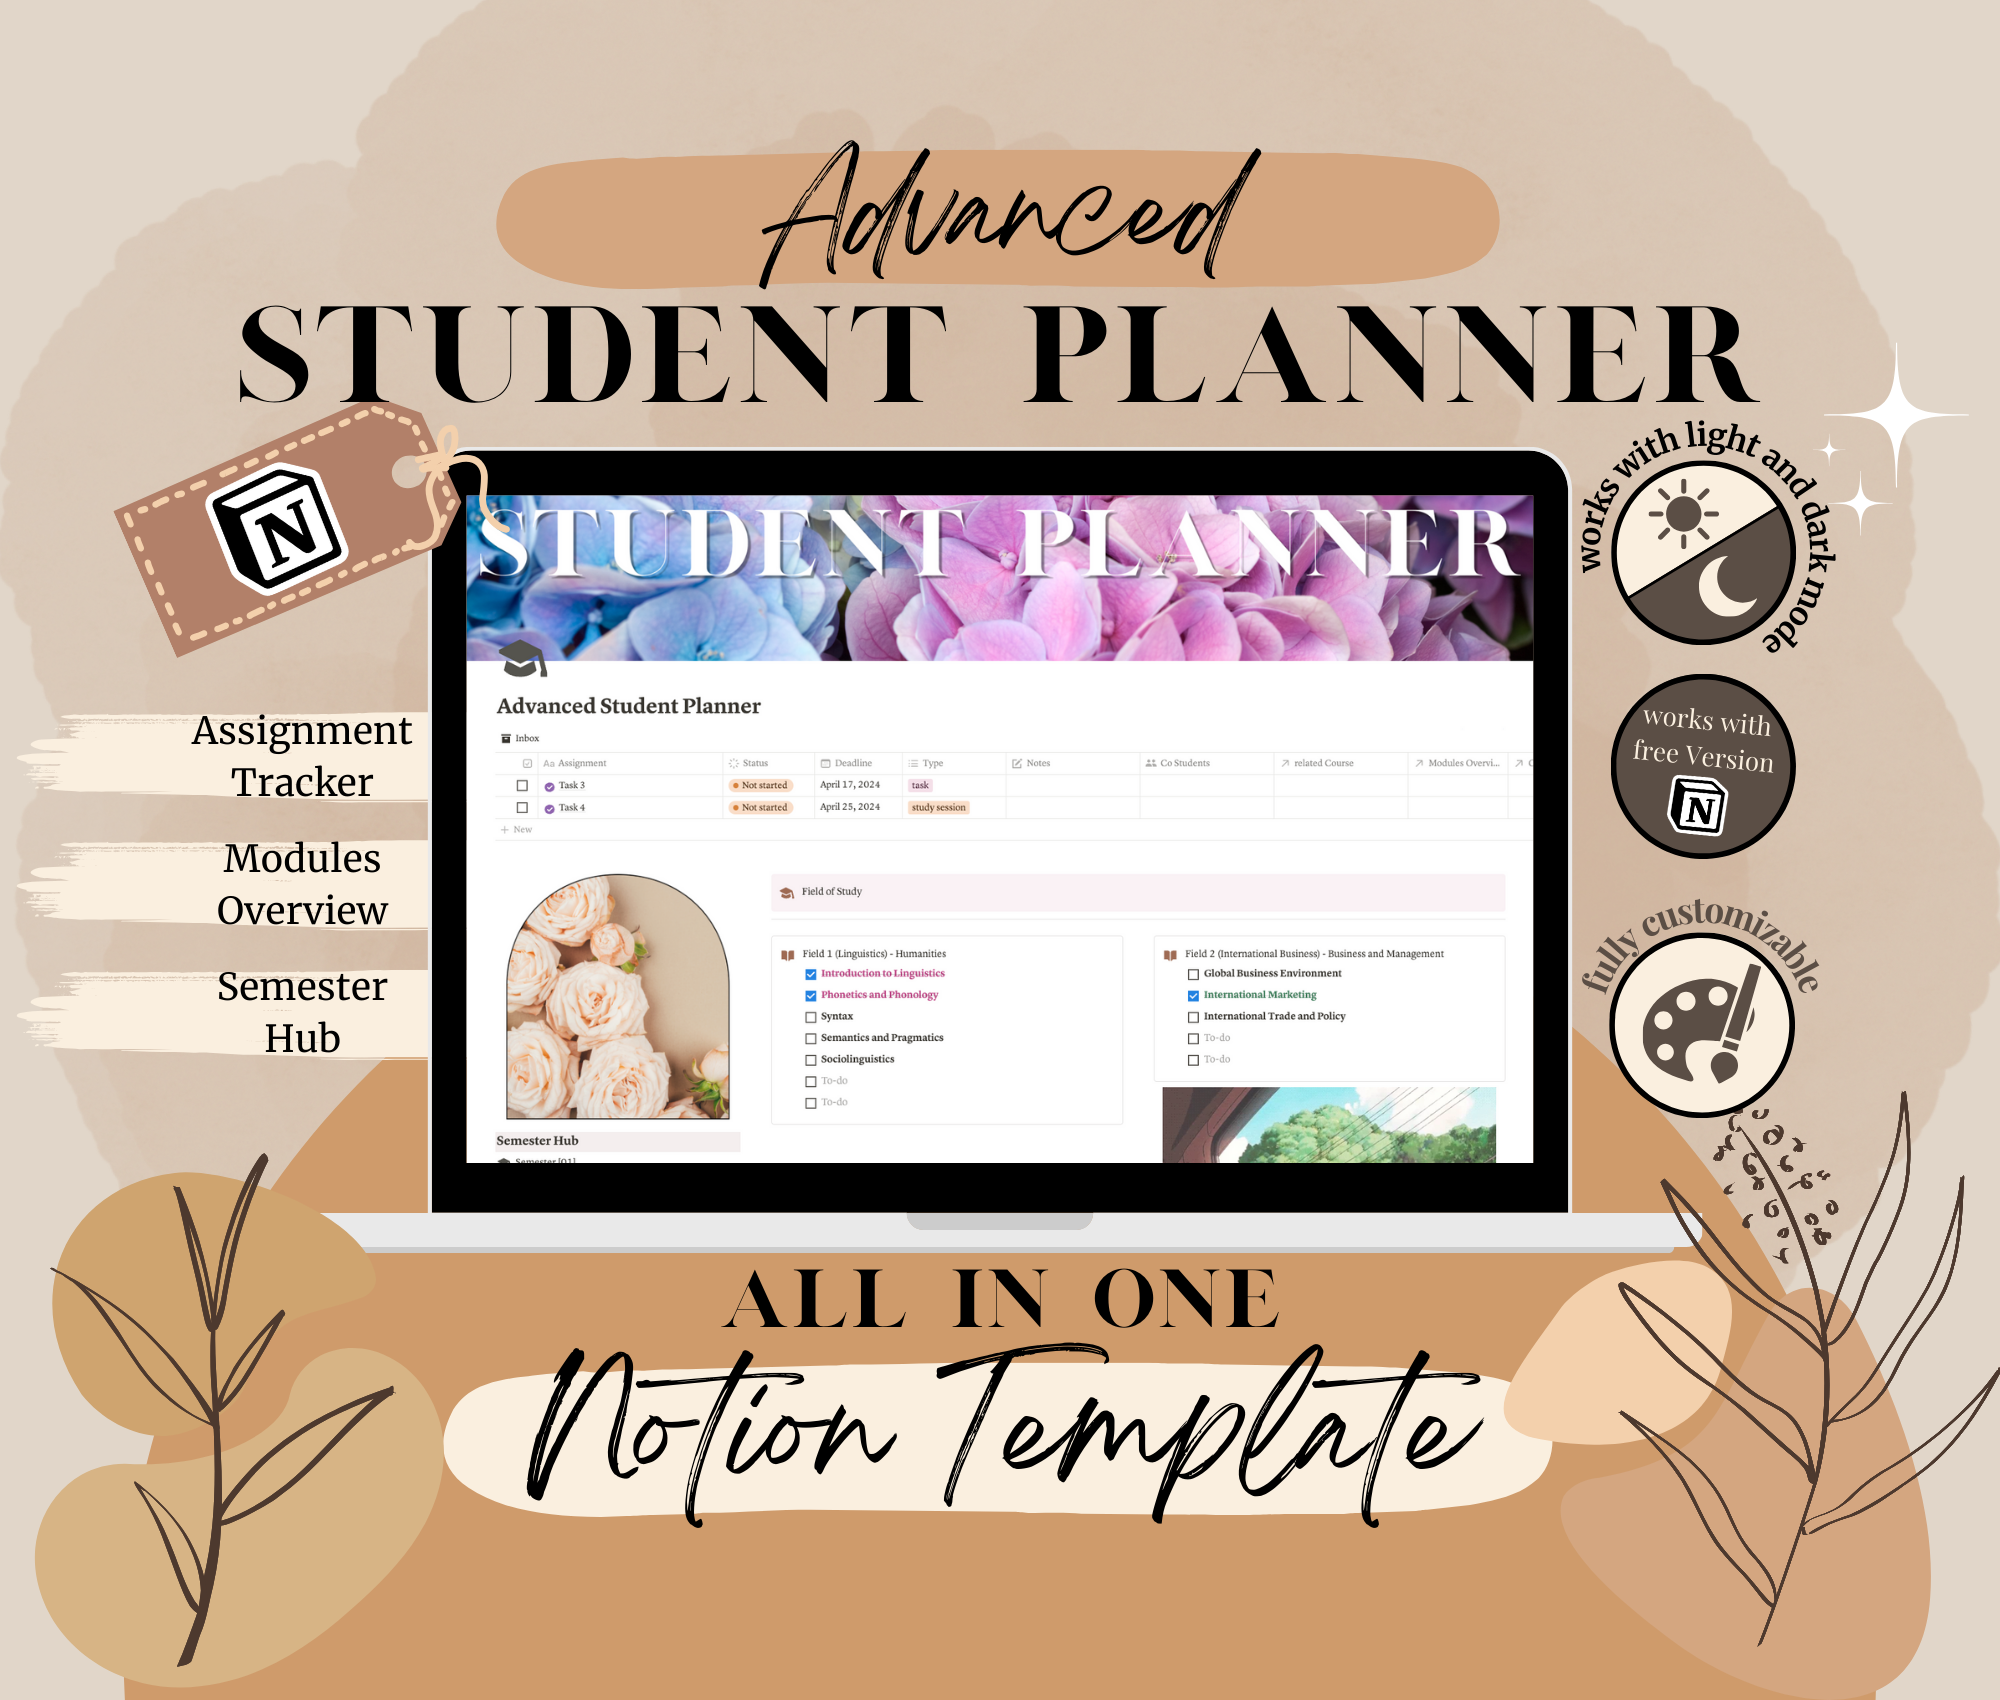 The "Advanced Student Planner" for Notion is designed to organize and enhance students' academic lives, featuring customizable modules for course management, deadlines, and study sessions.